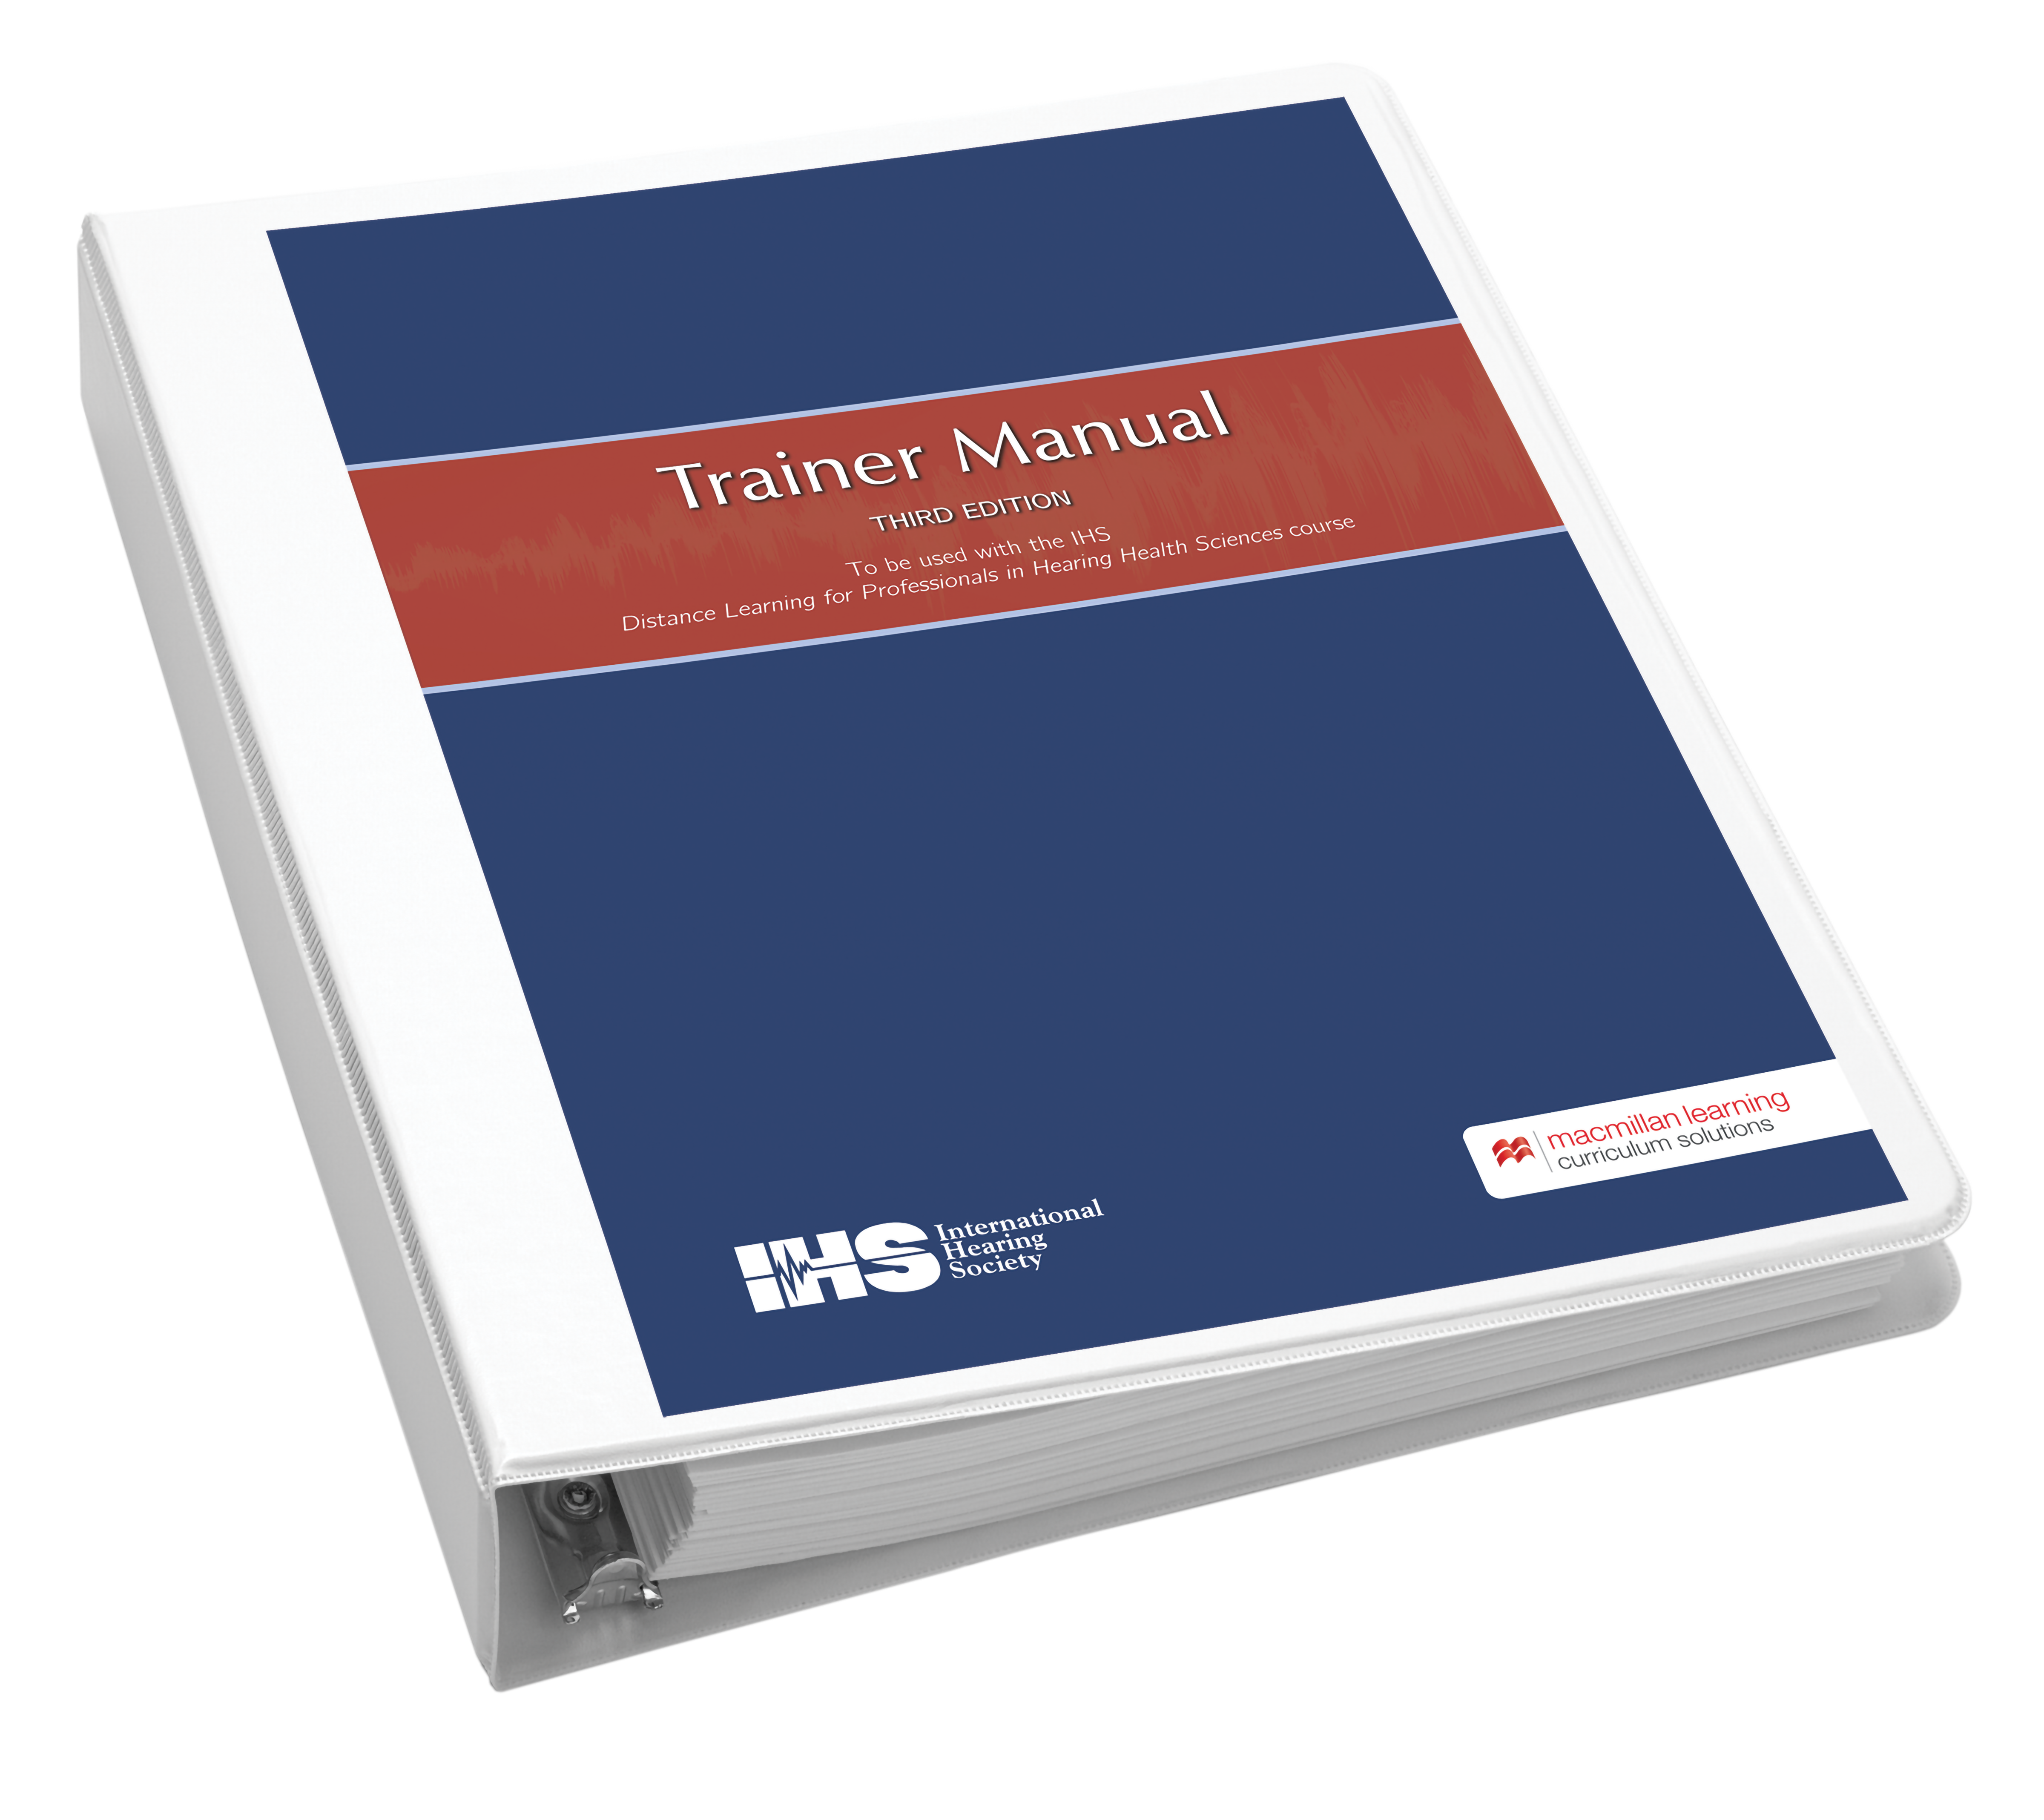 Trainer Manual 3rd Edition